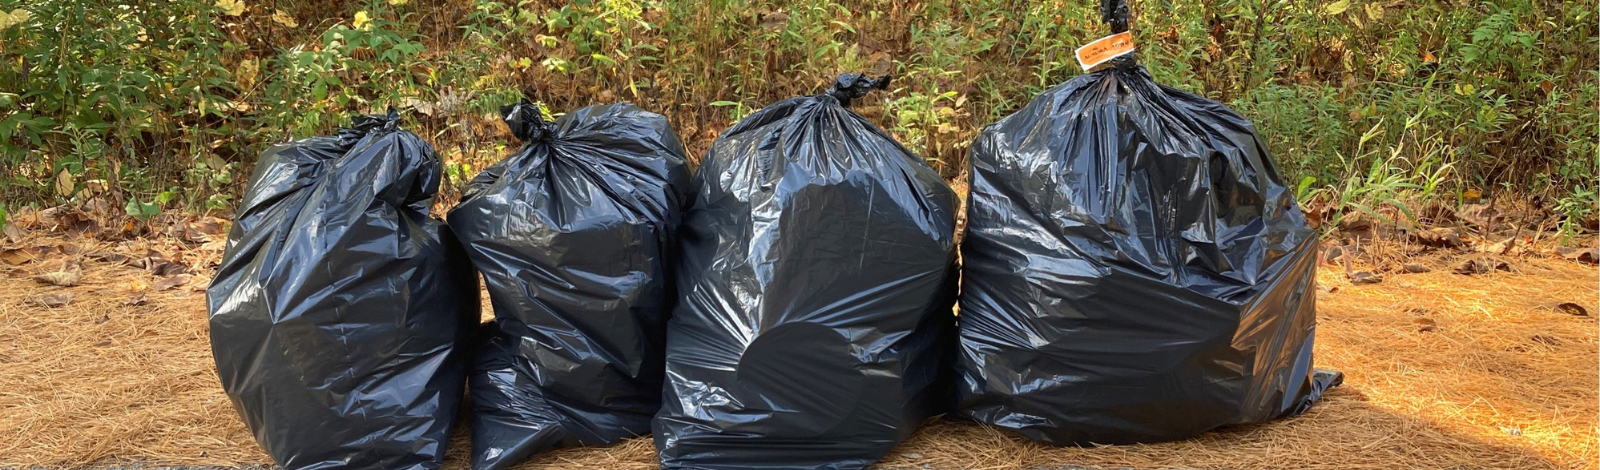 Image of Garbage Bags with orange tags on them